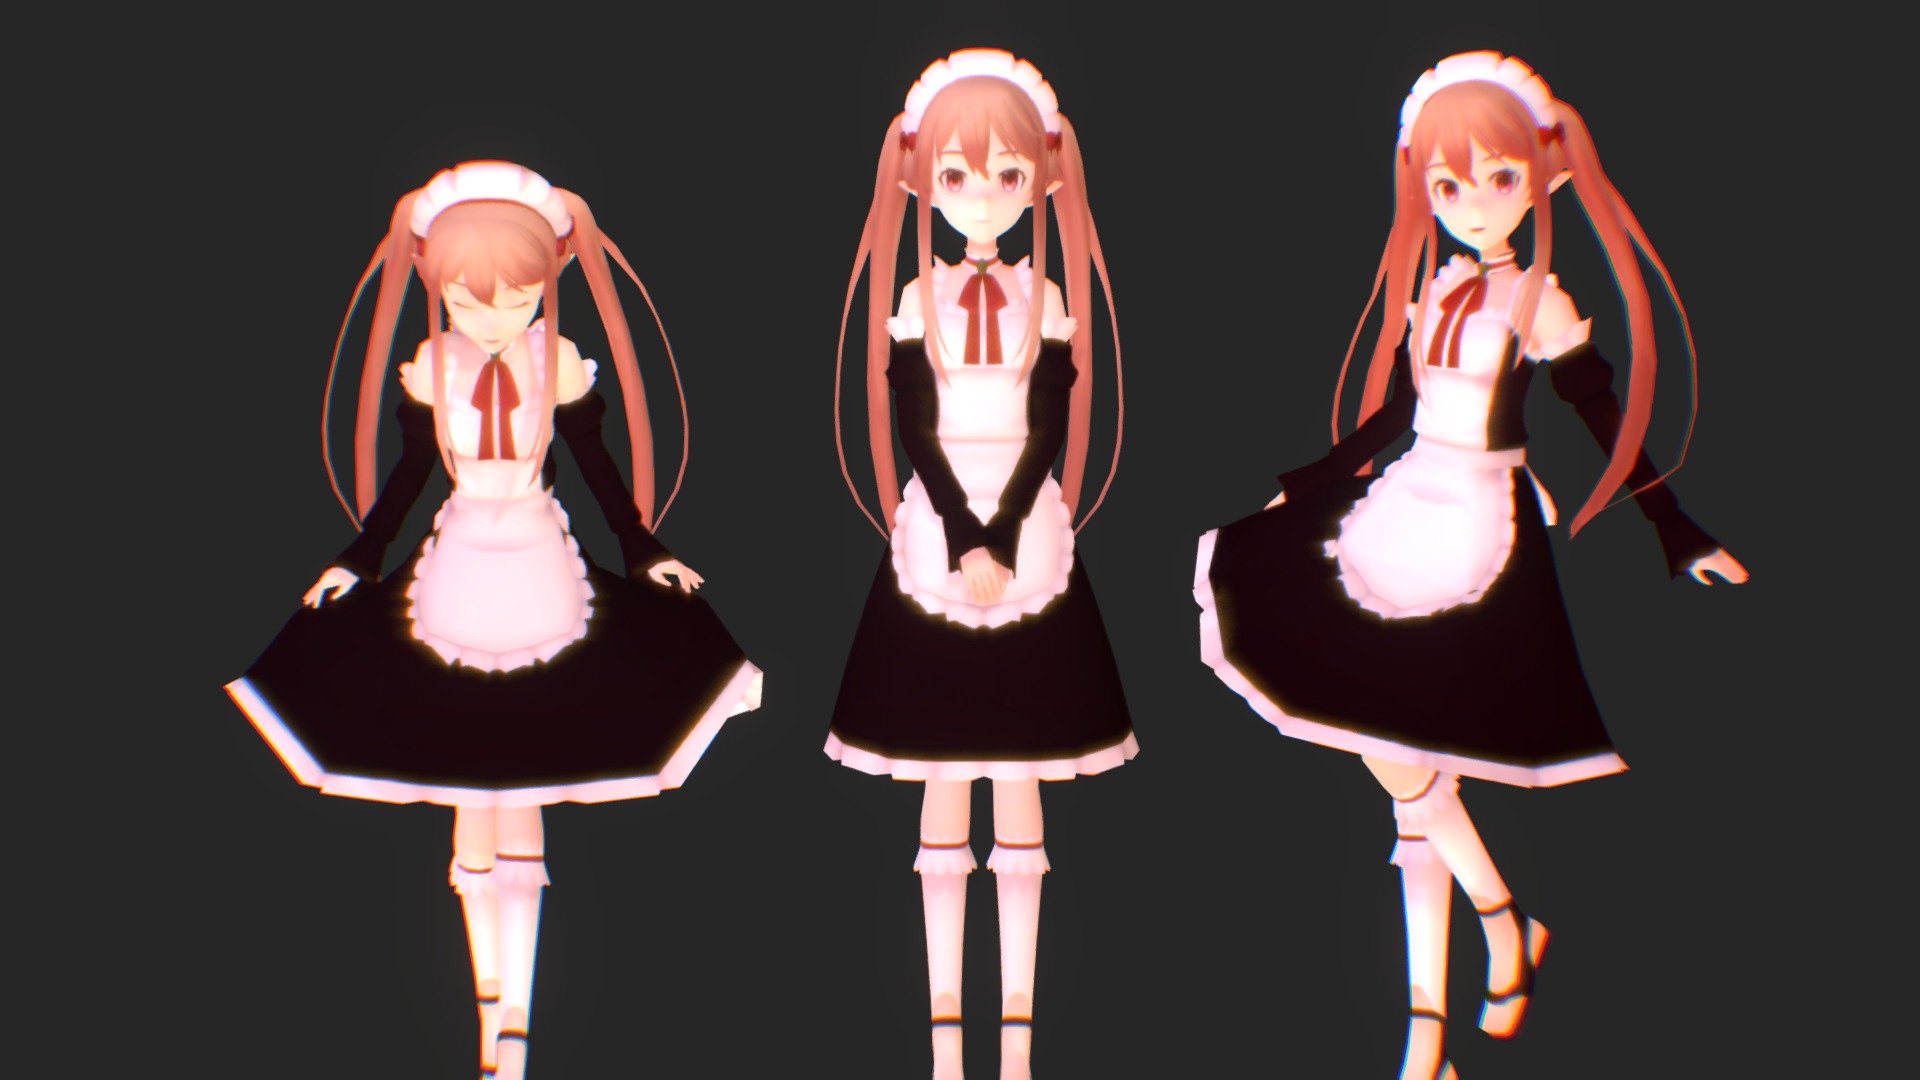 Here's a model made on MAYA2016 and textured on 3DCOAT. It's Myucel from OutBreak Company.

WorkProgress on my DeviantArt Stash
https://sta.sh/2wz4aaw133x

Animation DEMO:
https://youtu.be/Ll7VFPQYZgU

Additional Download - MyucelPack includes UPDATED

MyucelTPOSE.obj and mtl

Textures

Myucel FBX (RIGGED) and Myucel UnityPackageFile 3d model